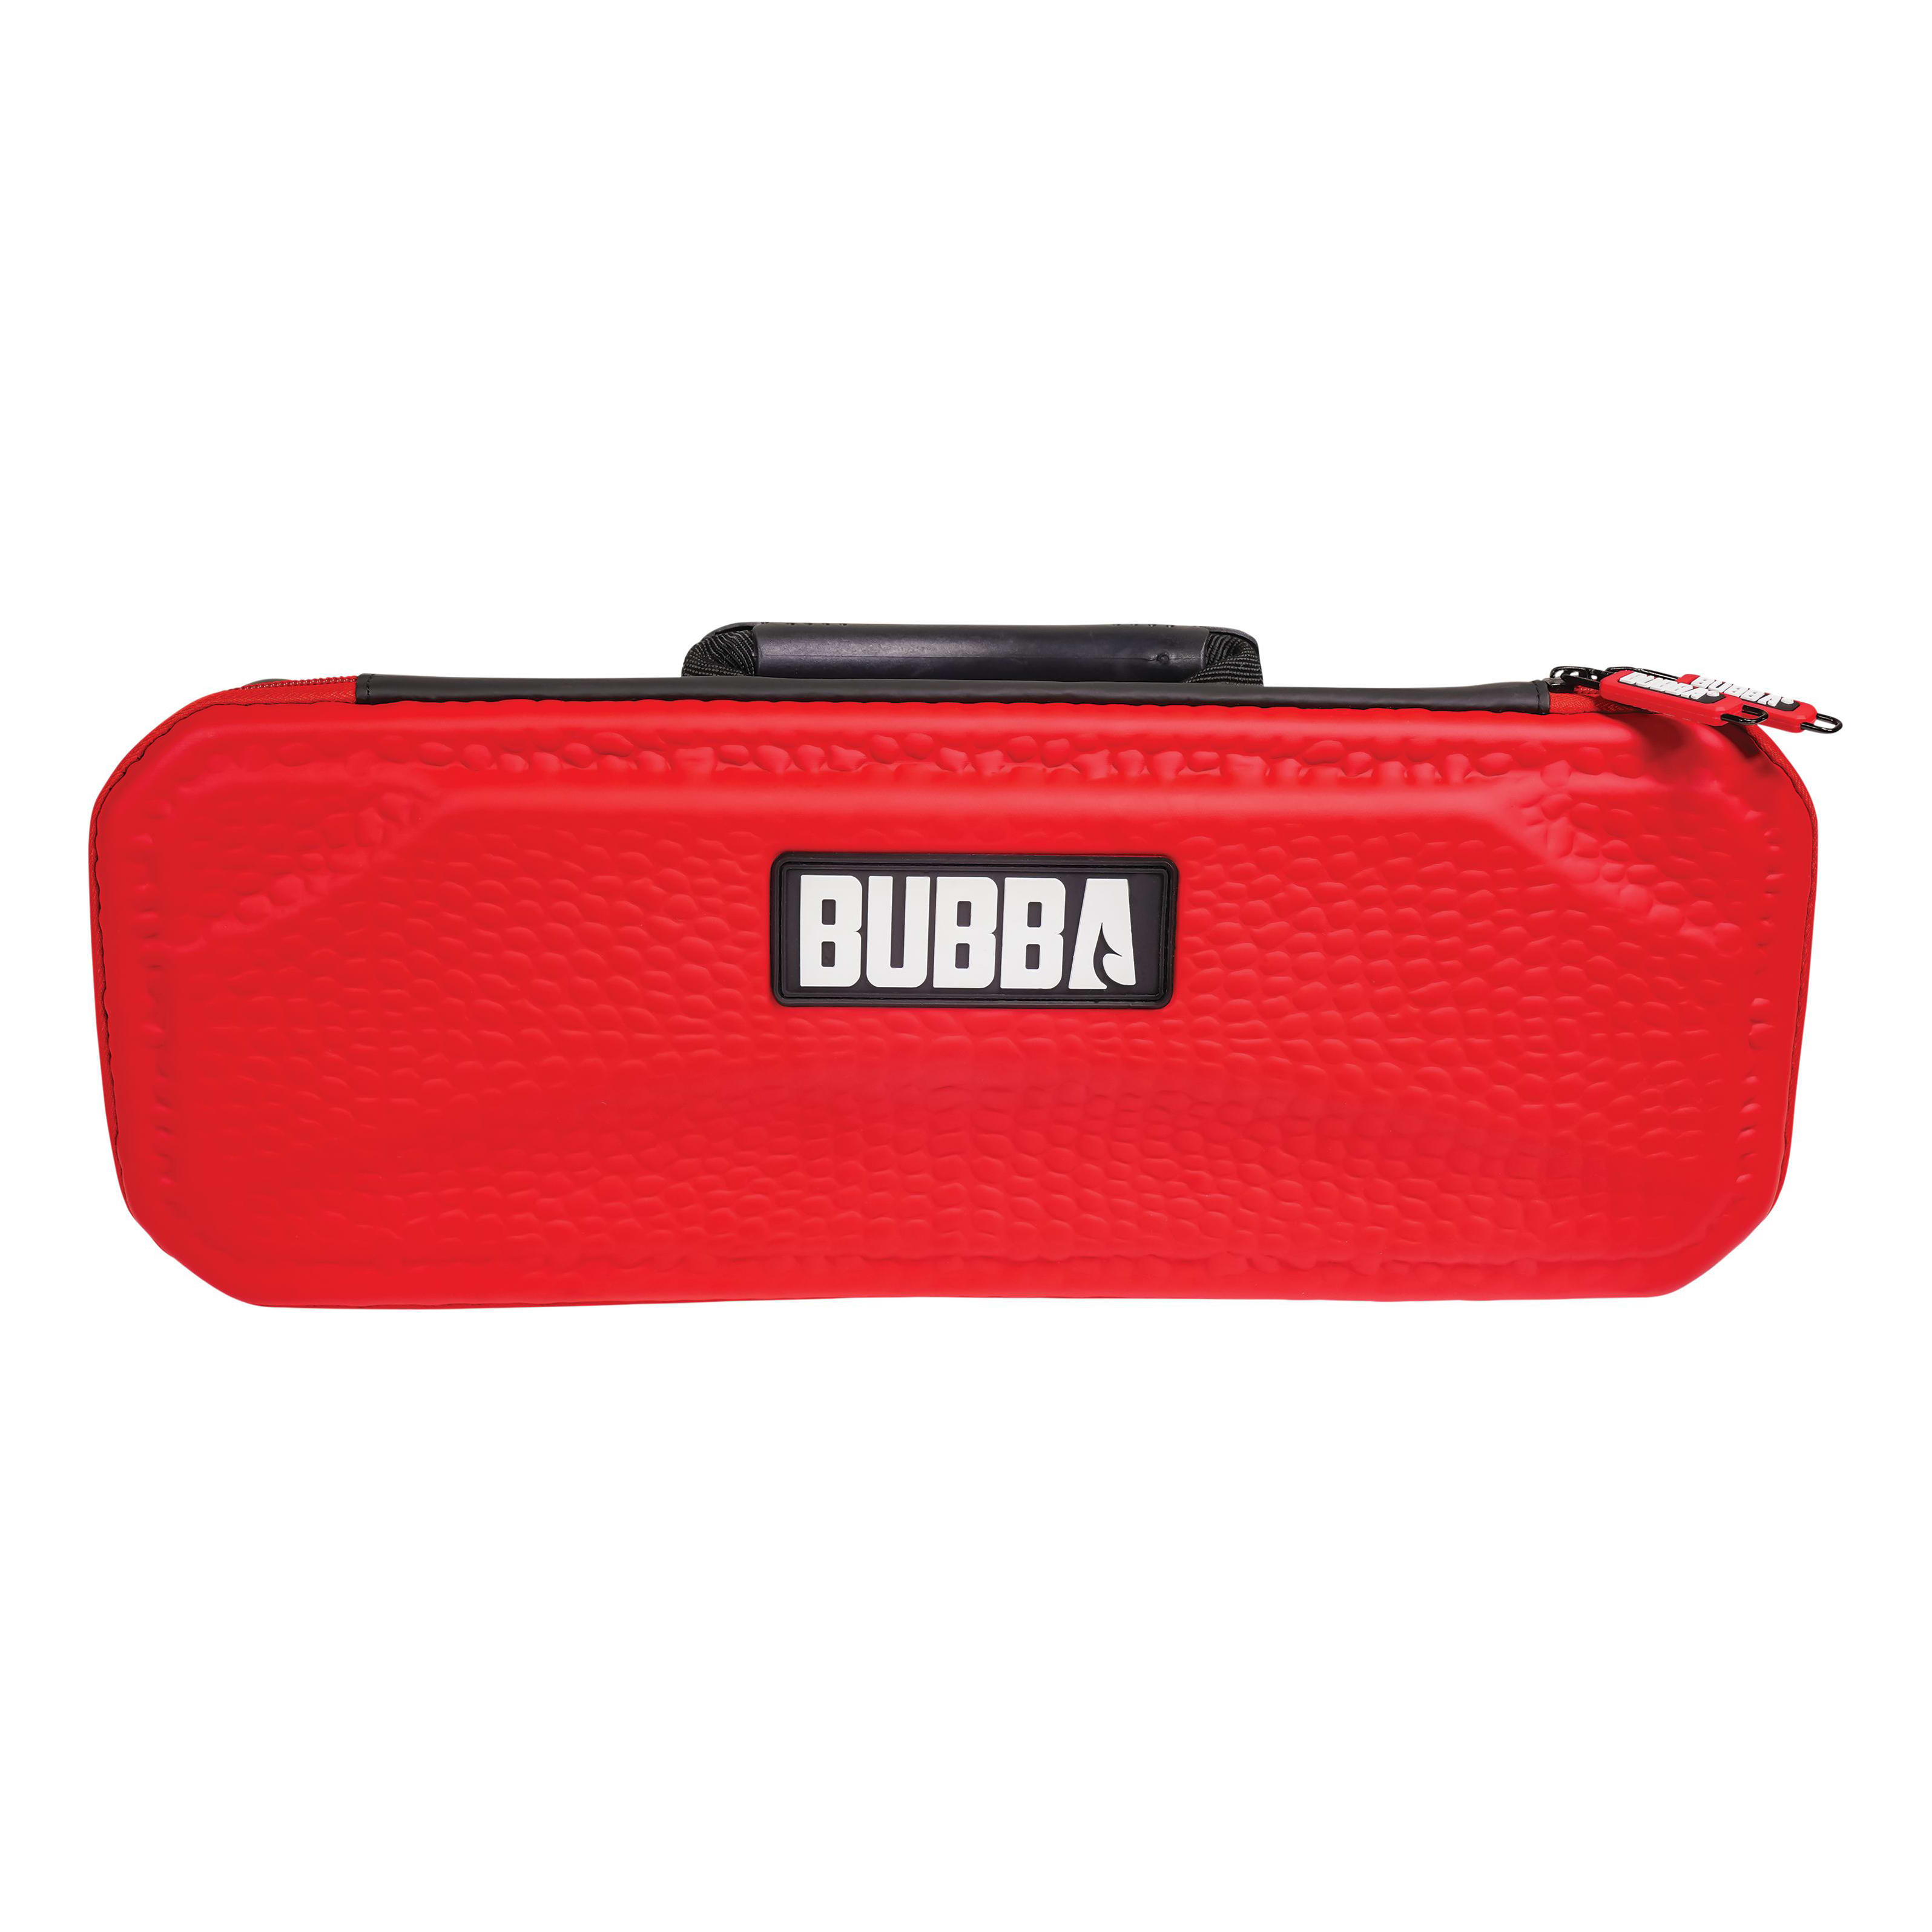 Bubba® Lithium-Ion Cordless Fillet Knife - Case View